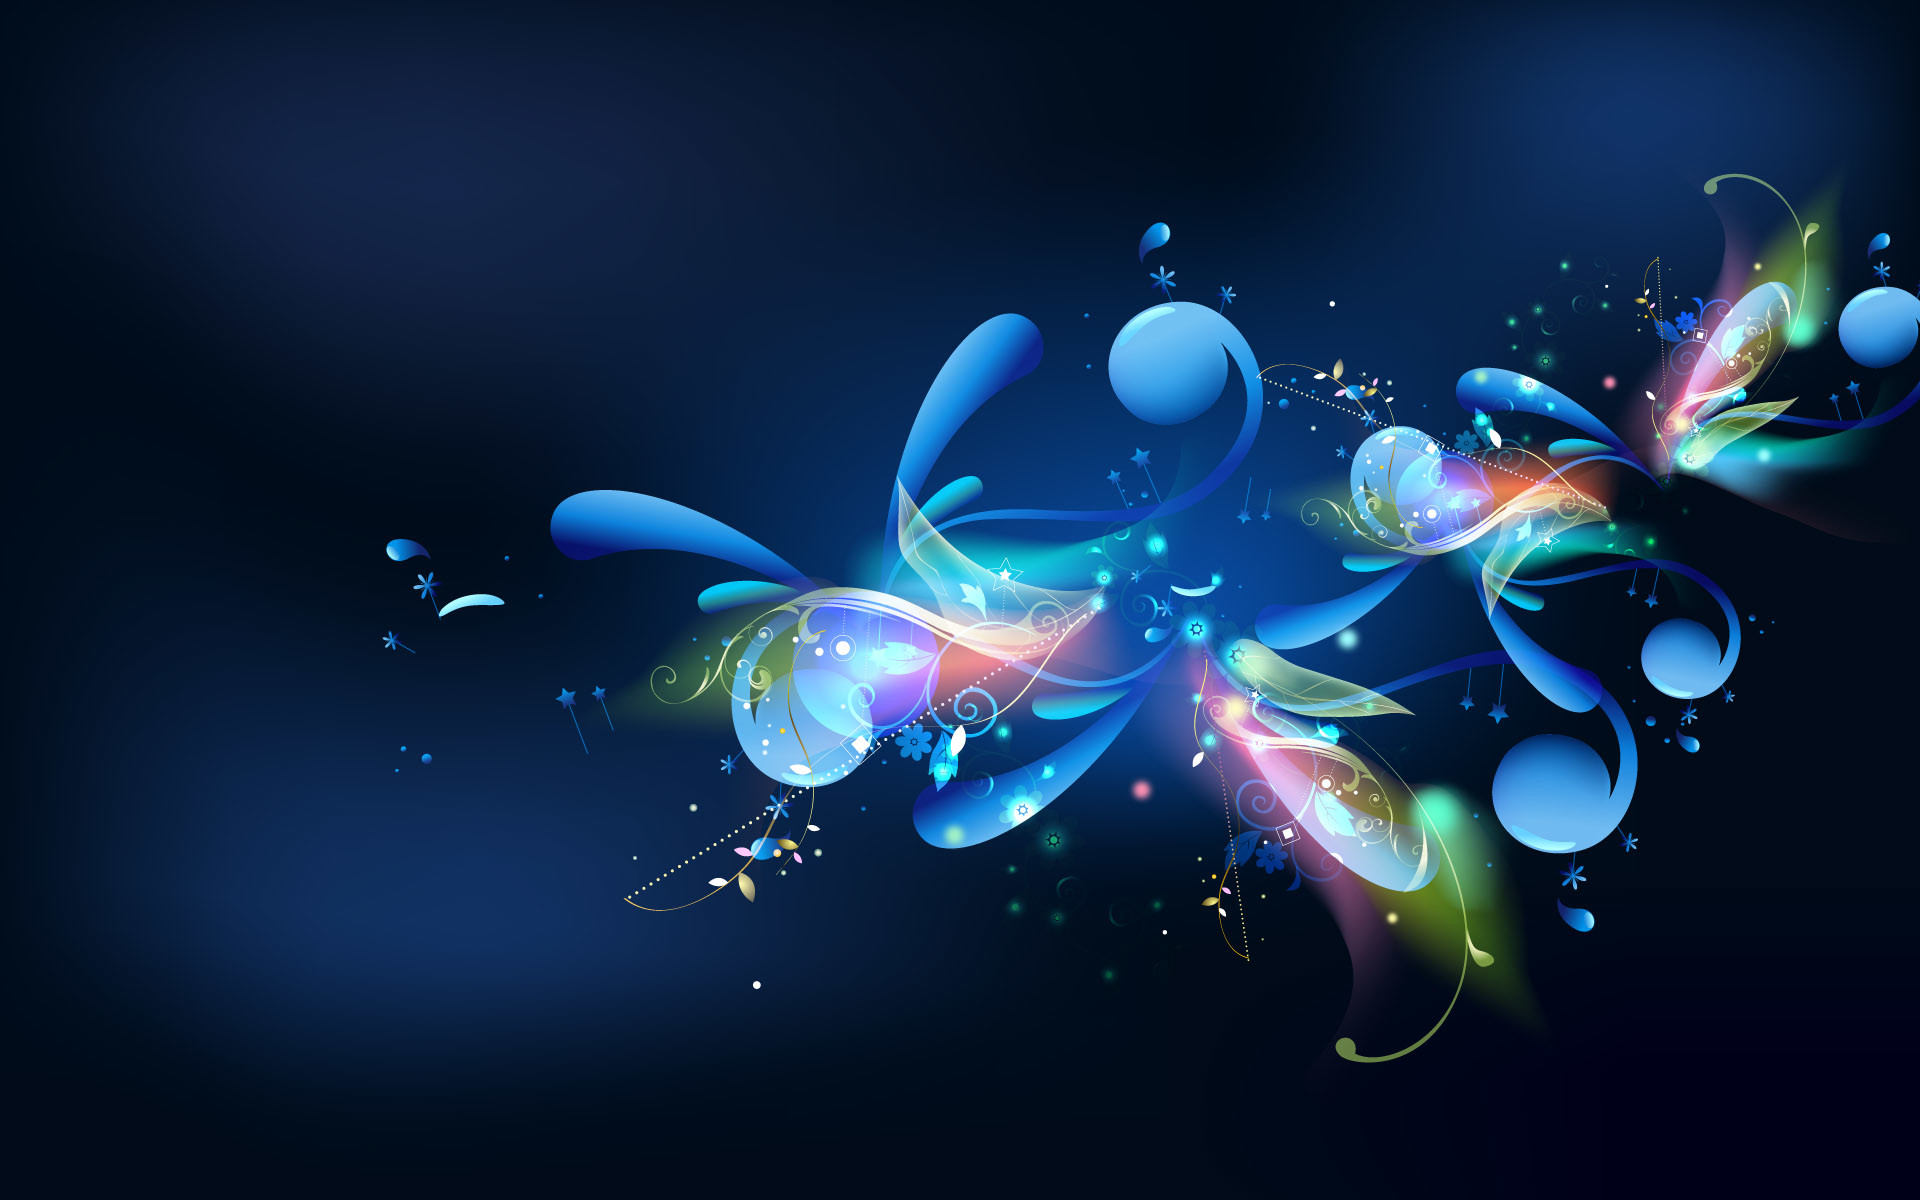 Abstract Backgrounds 5D8 Wallpaper